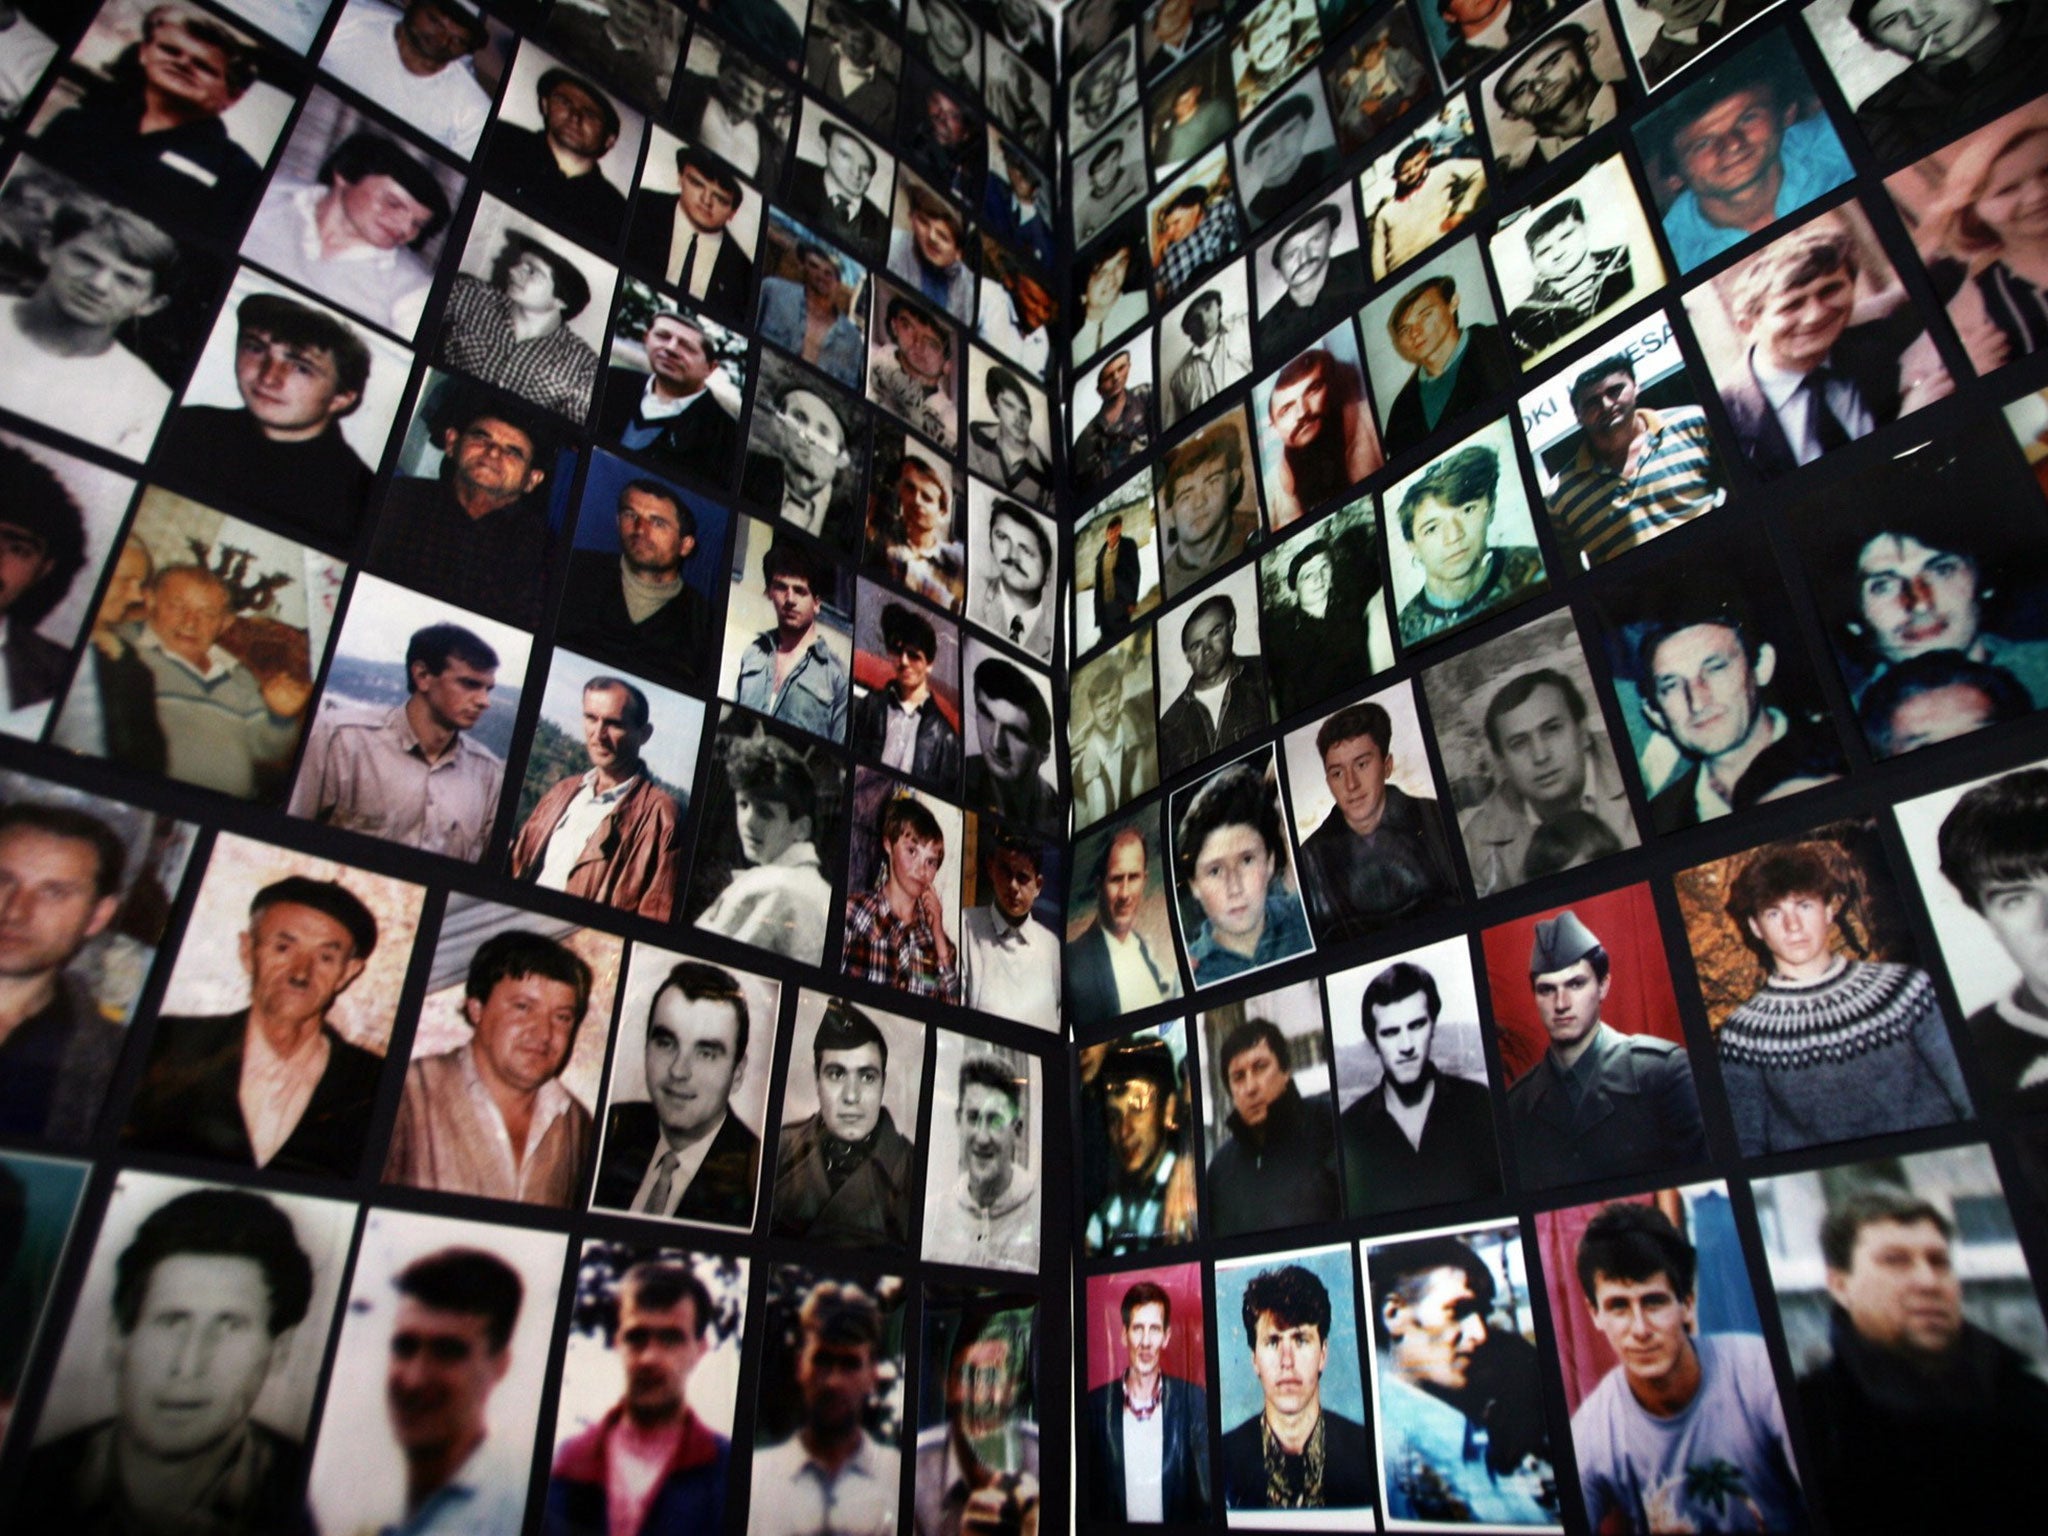 Portraits of victims of the 1995 Srebrenica massacre collected for a memorial in the Bosnian town of Tuzla